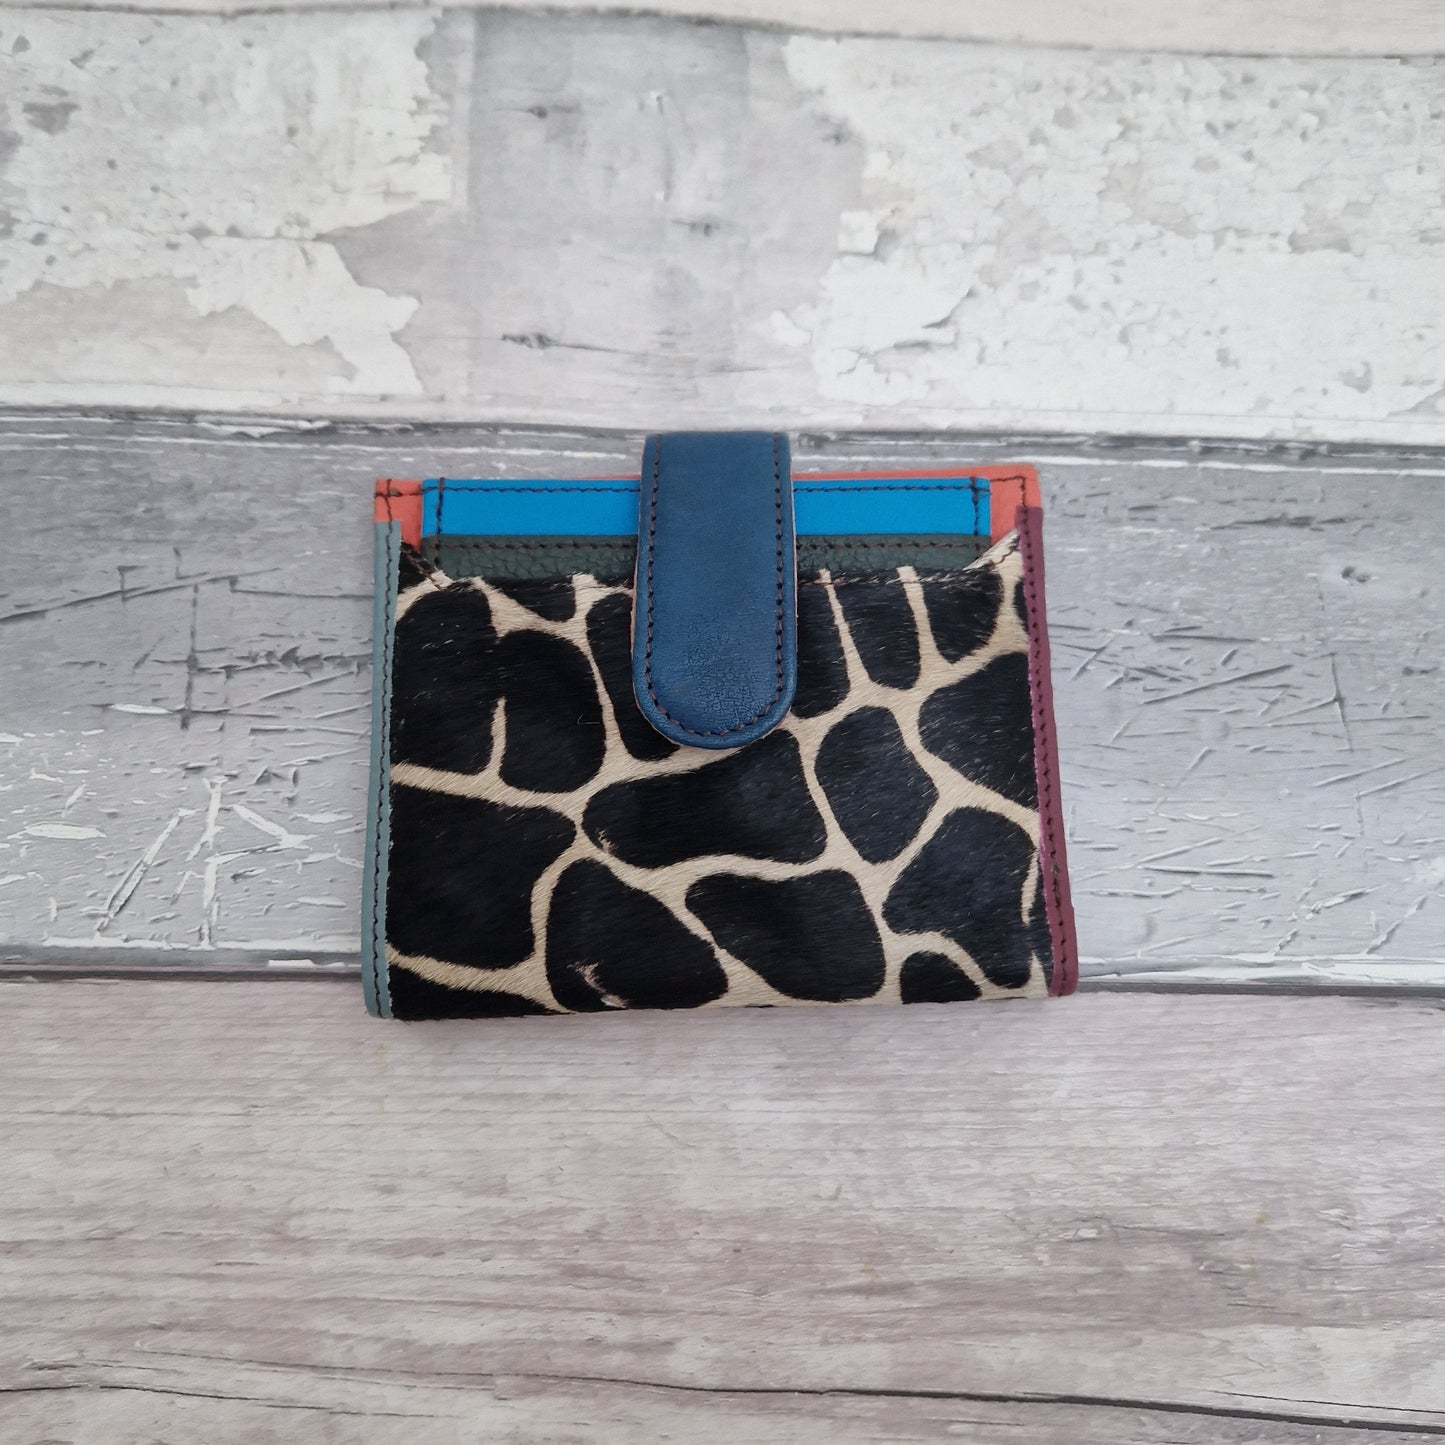 Giraffe print leather card wallet with a textured finish.